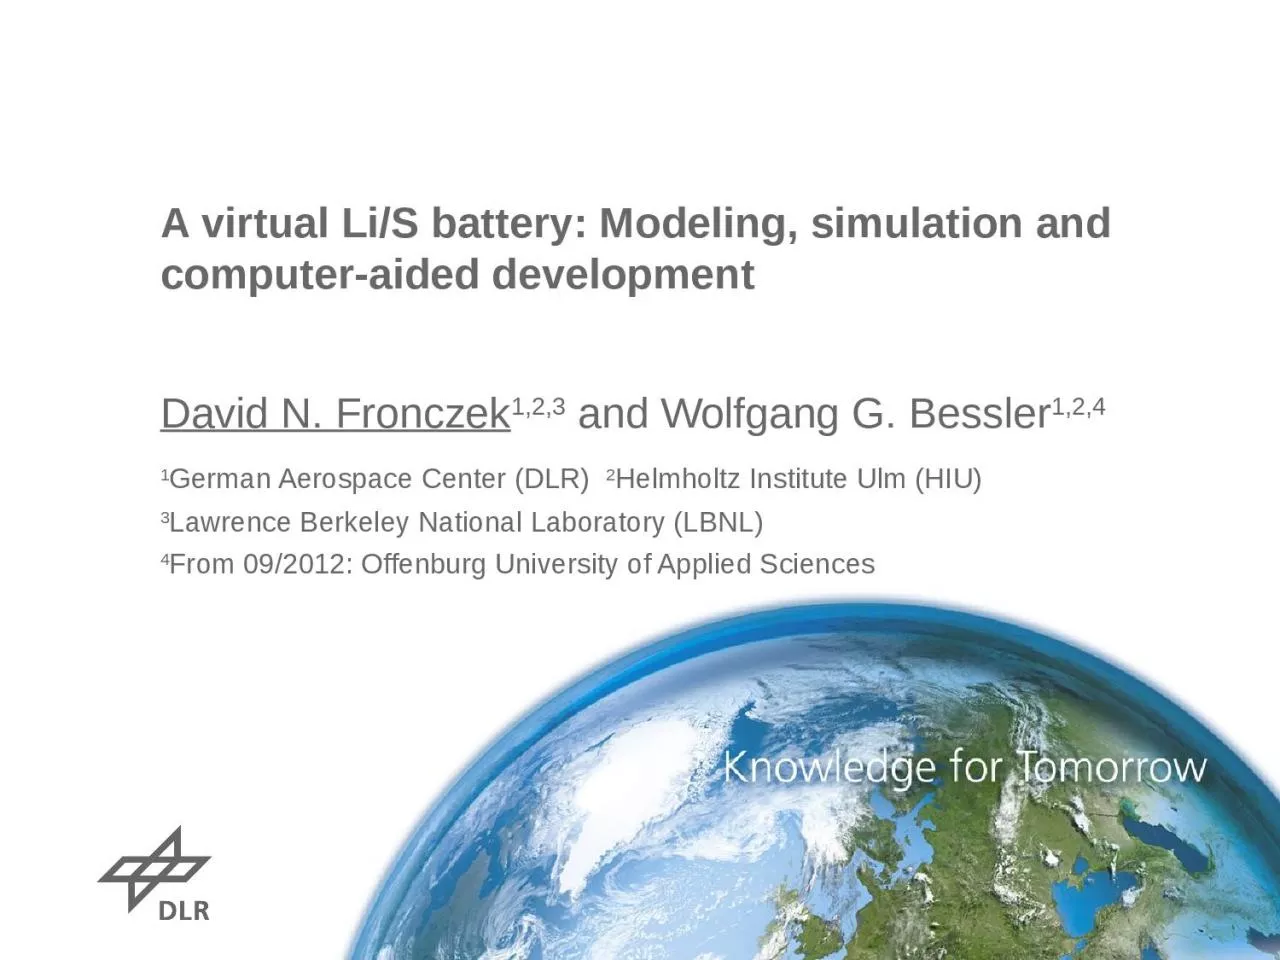 A virtual Li/S battery: Modeling, simulation and computer-aided development